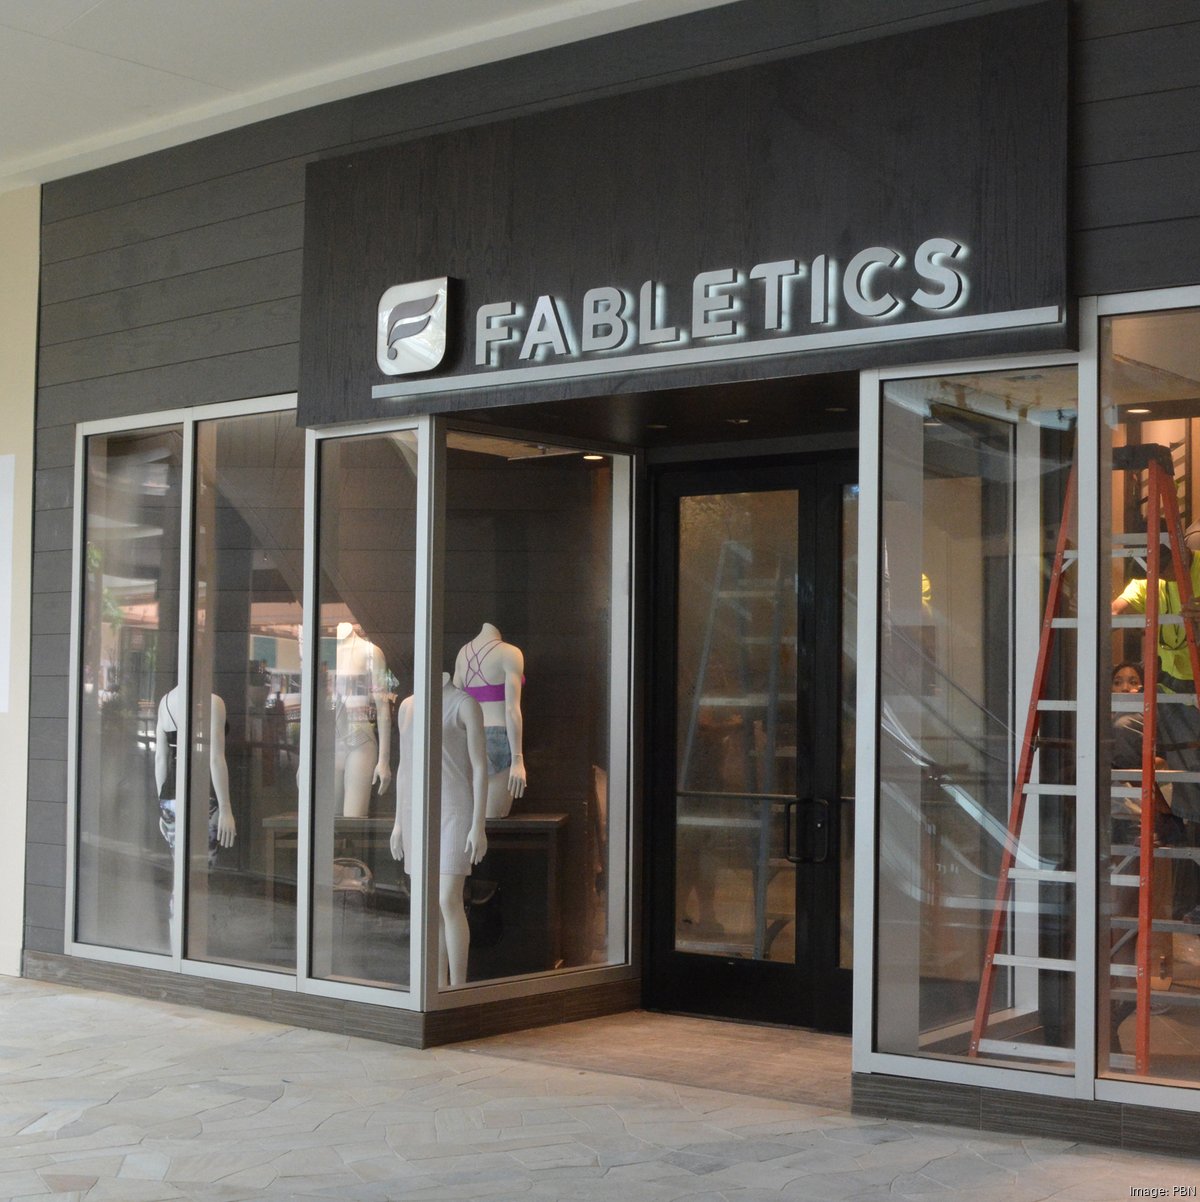 Fabletics to add 24 stores in 2021 - L.A. Business First